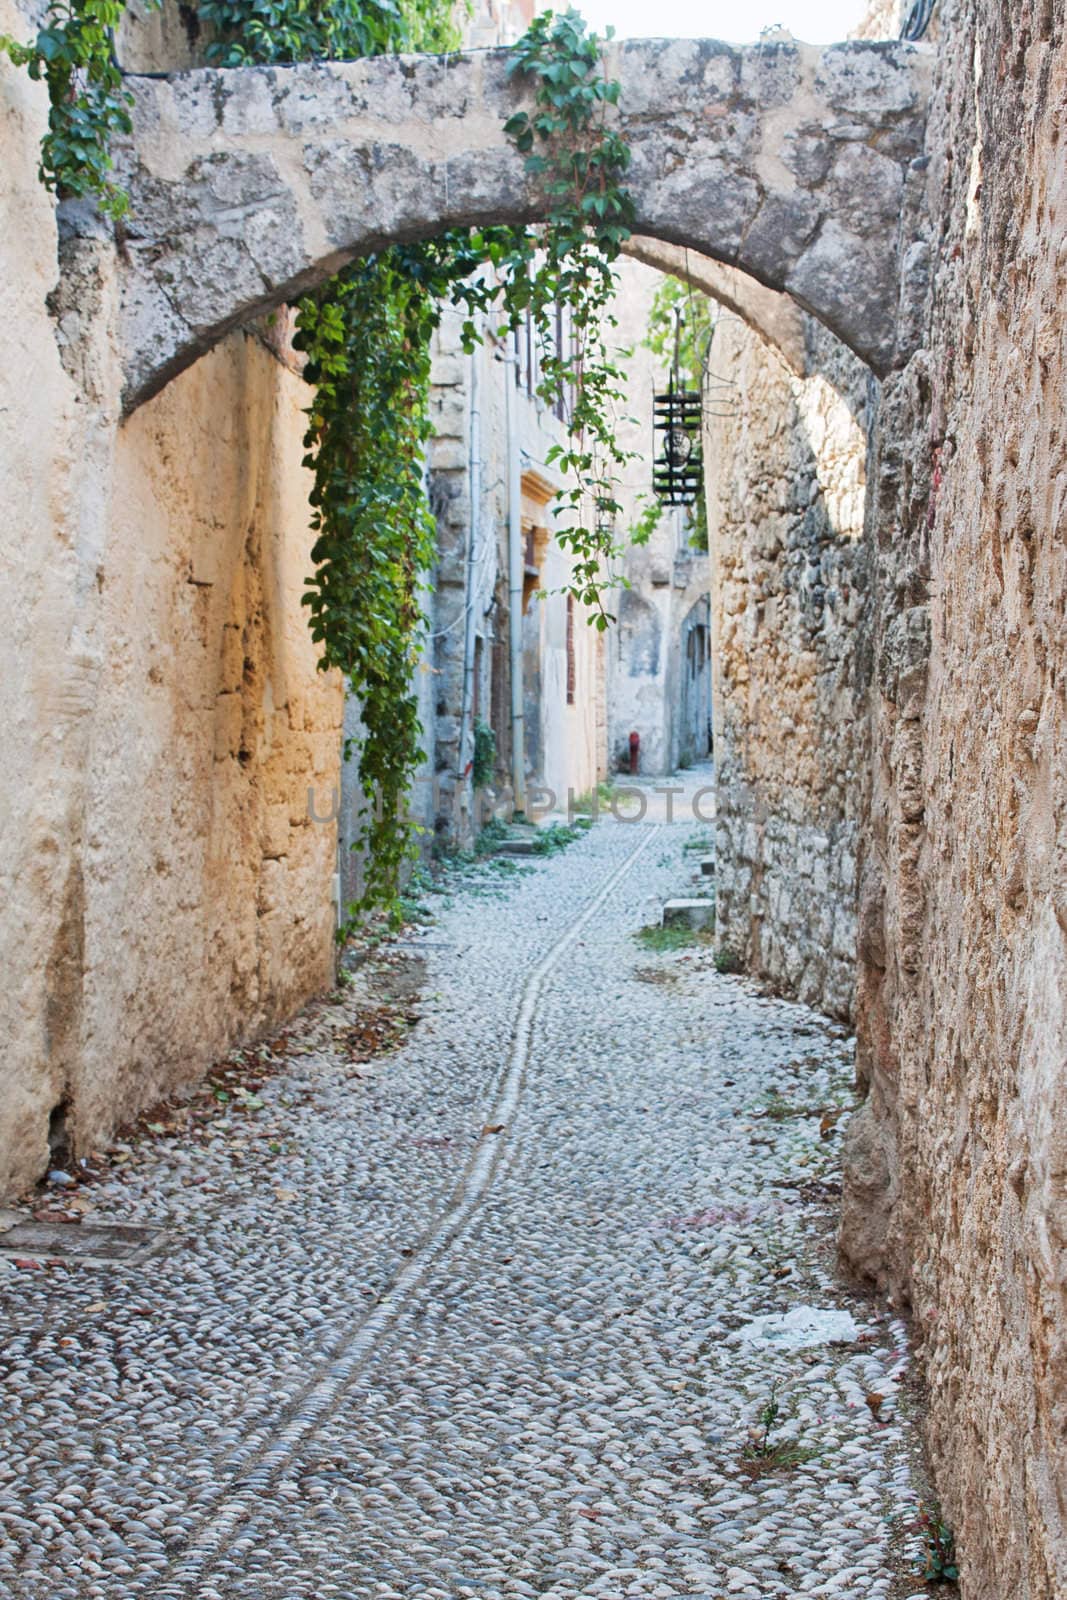 A medieval cobblestone alley in Rhodes Old Town (a UNESCO World Heritage Site), Greece, with arches and stone facades.